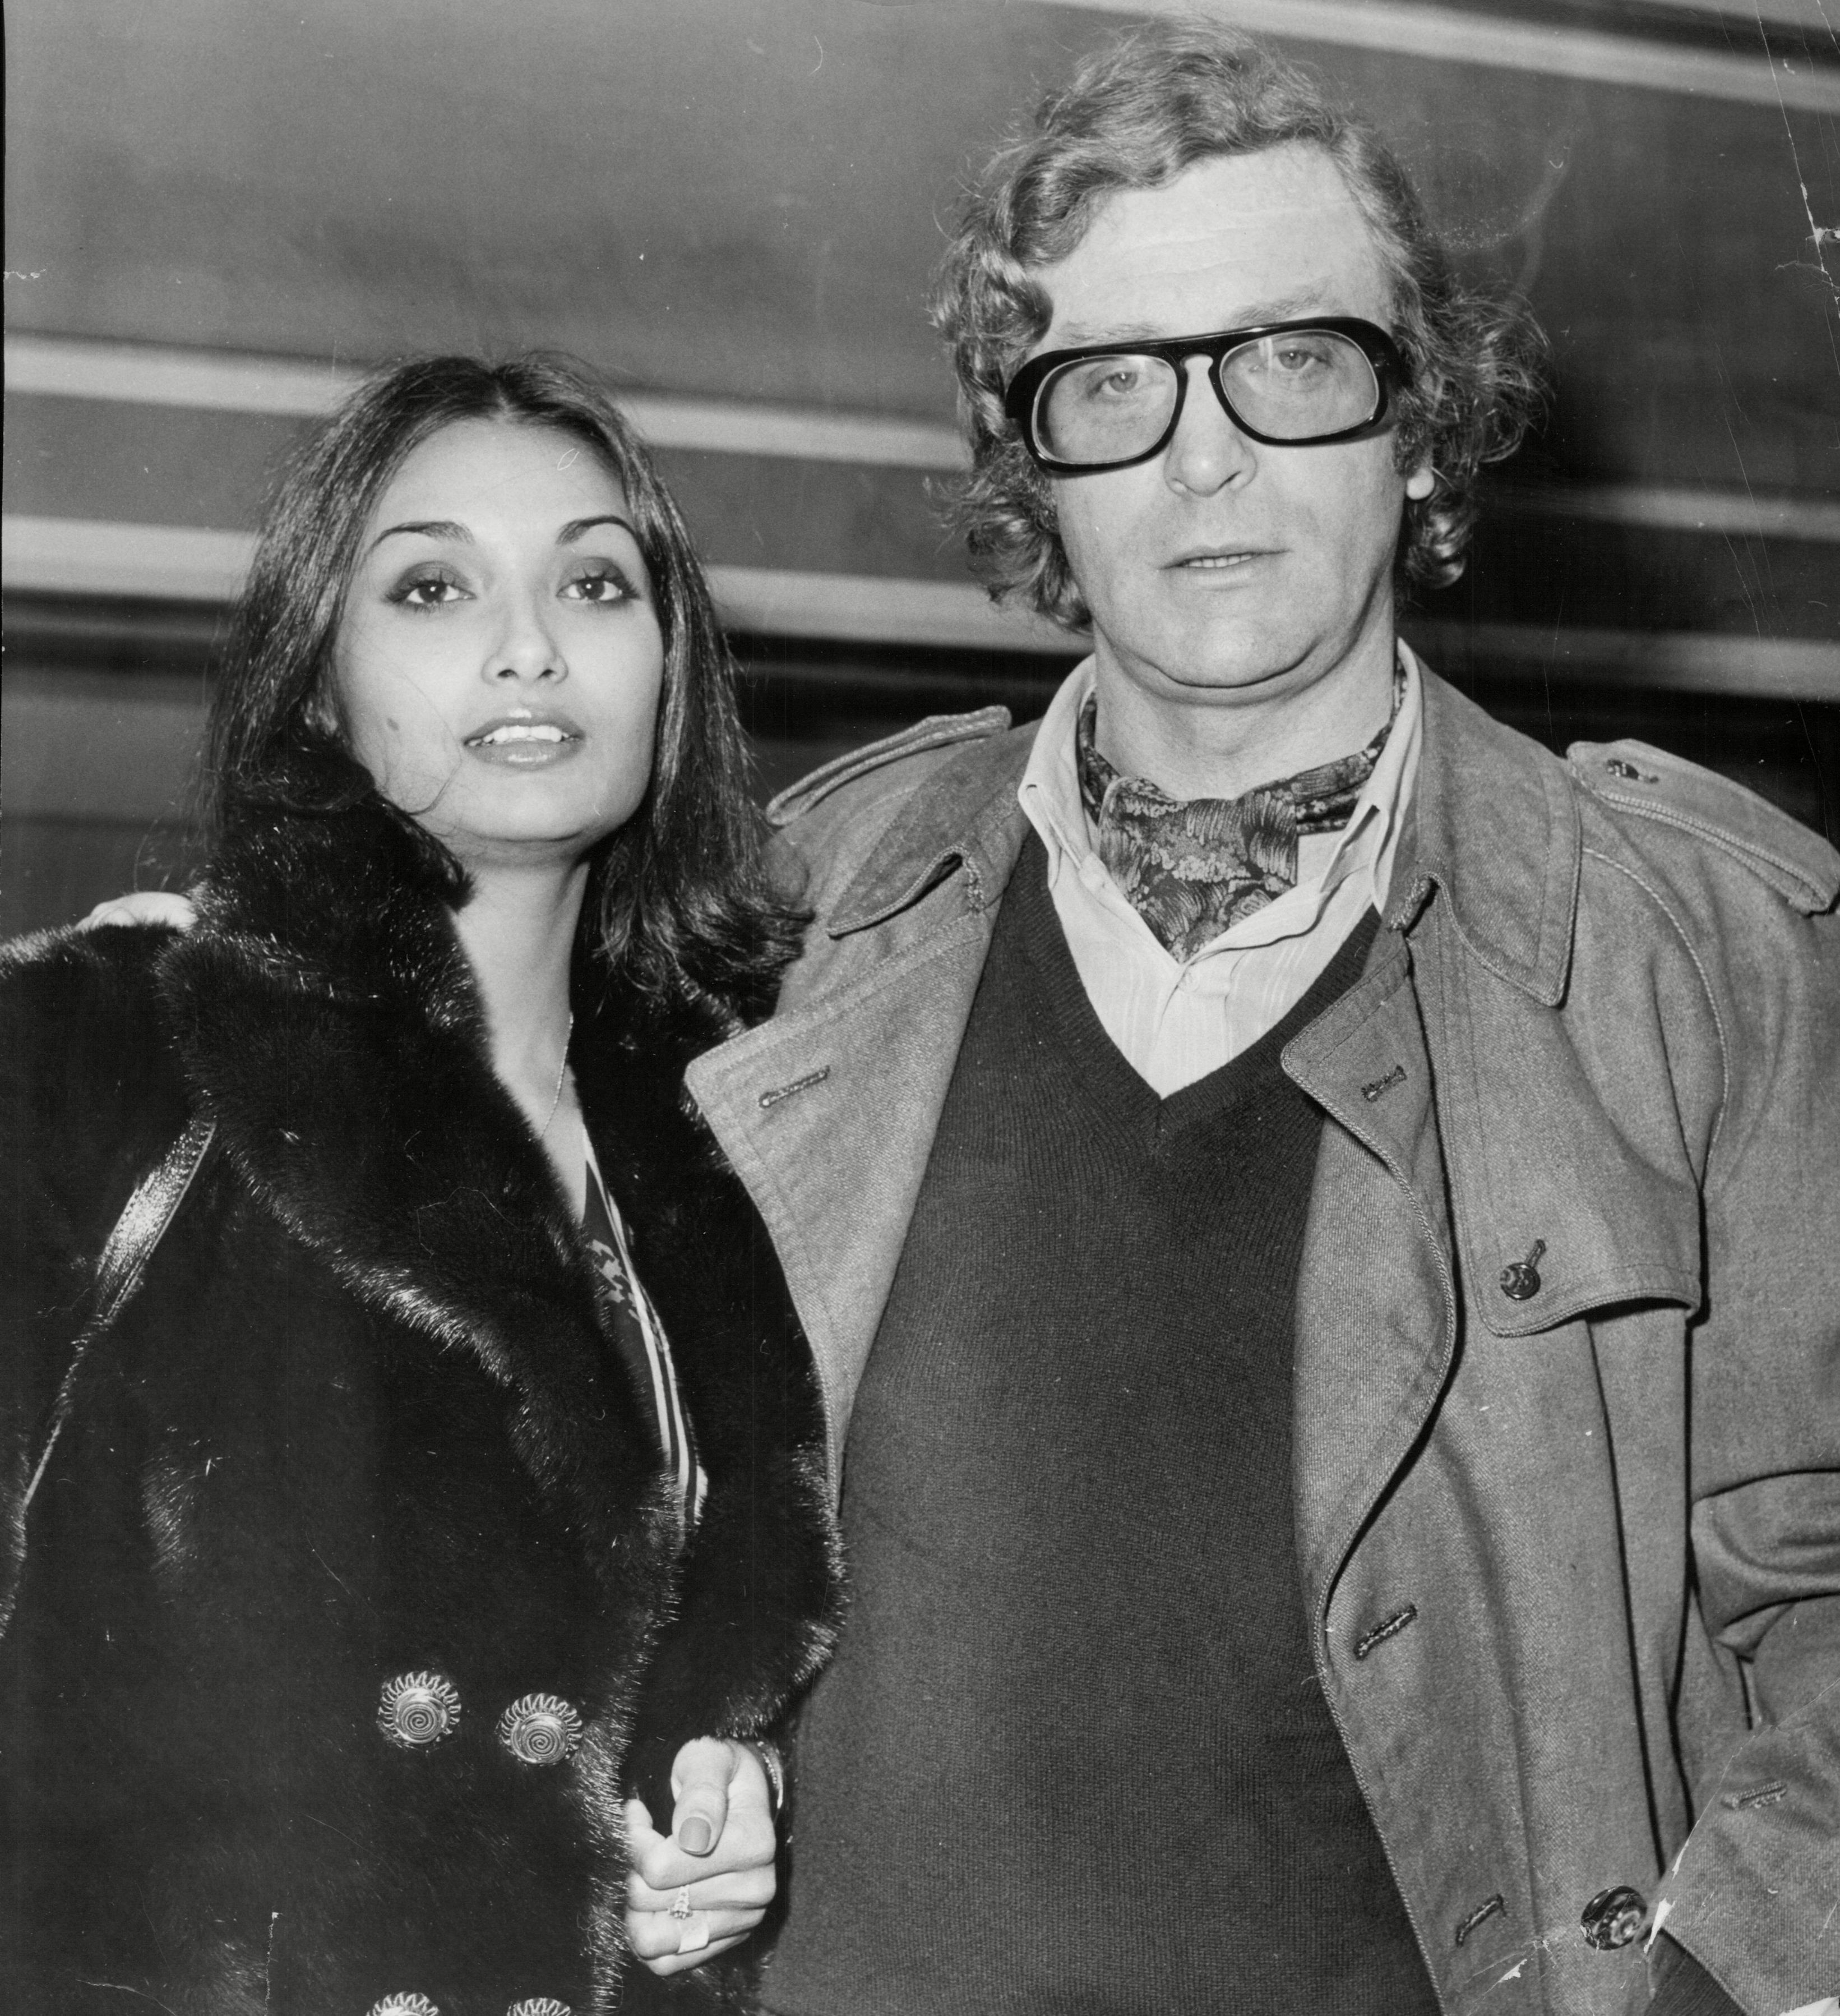 <p>Michael Caine and Shakira Baksh have been happily married since 1973. Their epic love story started one night in 1971 when the English acting legend was watching TV at home with a buddy. A Maxwell House coffee advertisement set in Brazil came on -- and Shakira, a model, was in it. "I saw this lady on the television in a commercial and fell in love instantly," Michael confessed on "The Jonathan Ross Show" in 2018. "I thought, 'That's the woman for me,' and I said to my mate, 'We're going to Brazil in the morning. We're going to find her.'" </p><p>The same night, they went to their local disco (it was the '70s, after all) where a mutual friend who worked in advertising joined them. When Michael mentioned the woman and his travel plans, the guy blew Michael's mind: "We make that commercial," he told the actor, who also shared the story on Andrew Denton's "Interview" show in Australia in 2019. The guy then informed Michael that Shakira wasn't Brazilian but of Indian descent (she was born in British Guiana) and told him, "She's not in Brazil, she's in Fulham Road," which was barely a mile from Michael's place. </p><p>He got Shakira's number and "I phoned her 11 times, 10 of which she wouldn't go out with me," he said. "The last one she decided to go out with me... We went out and fell in love instantly and have never parted since."</p>